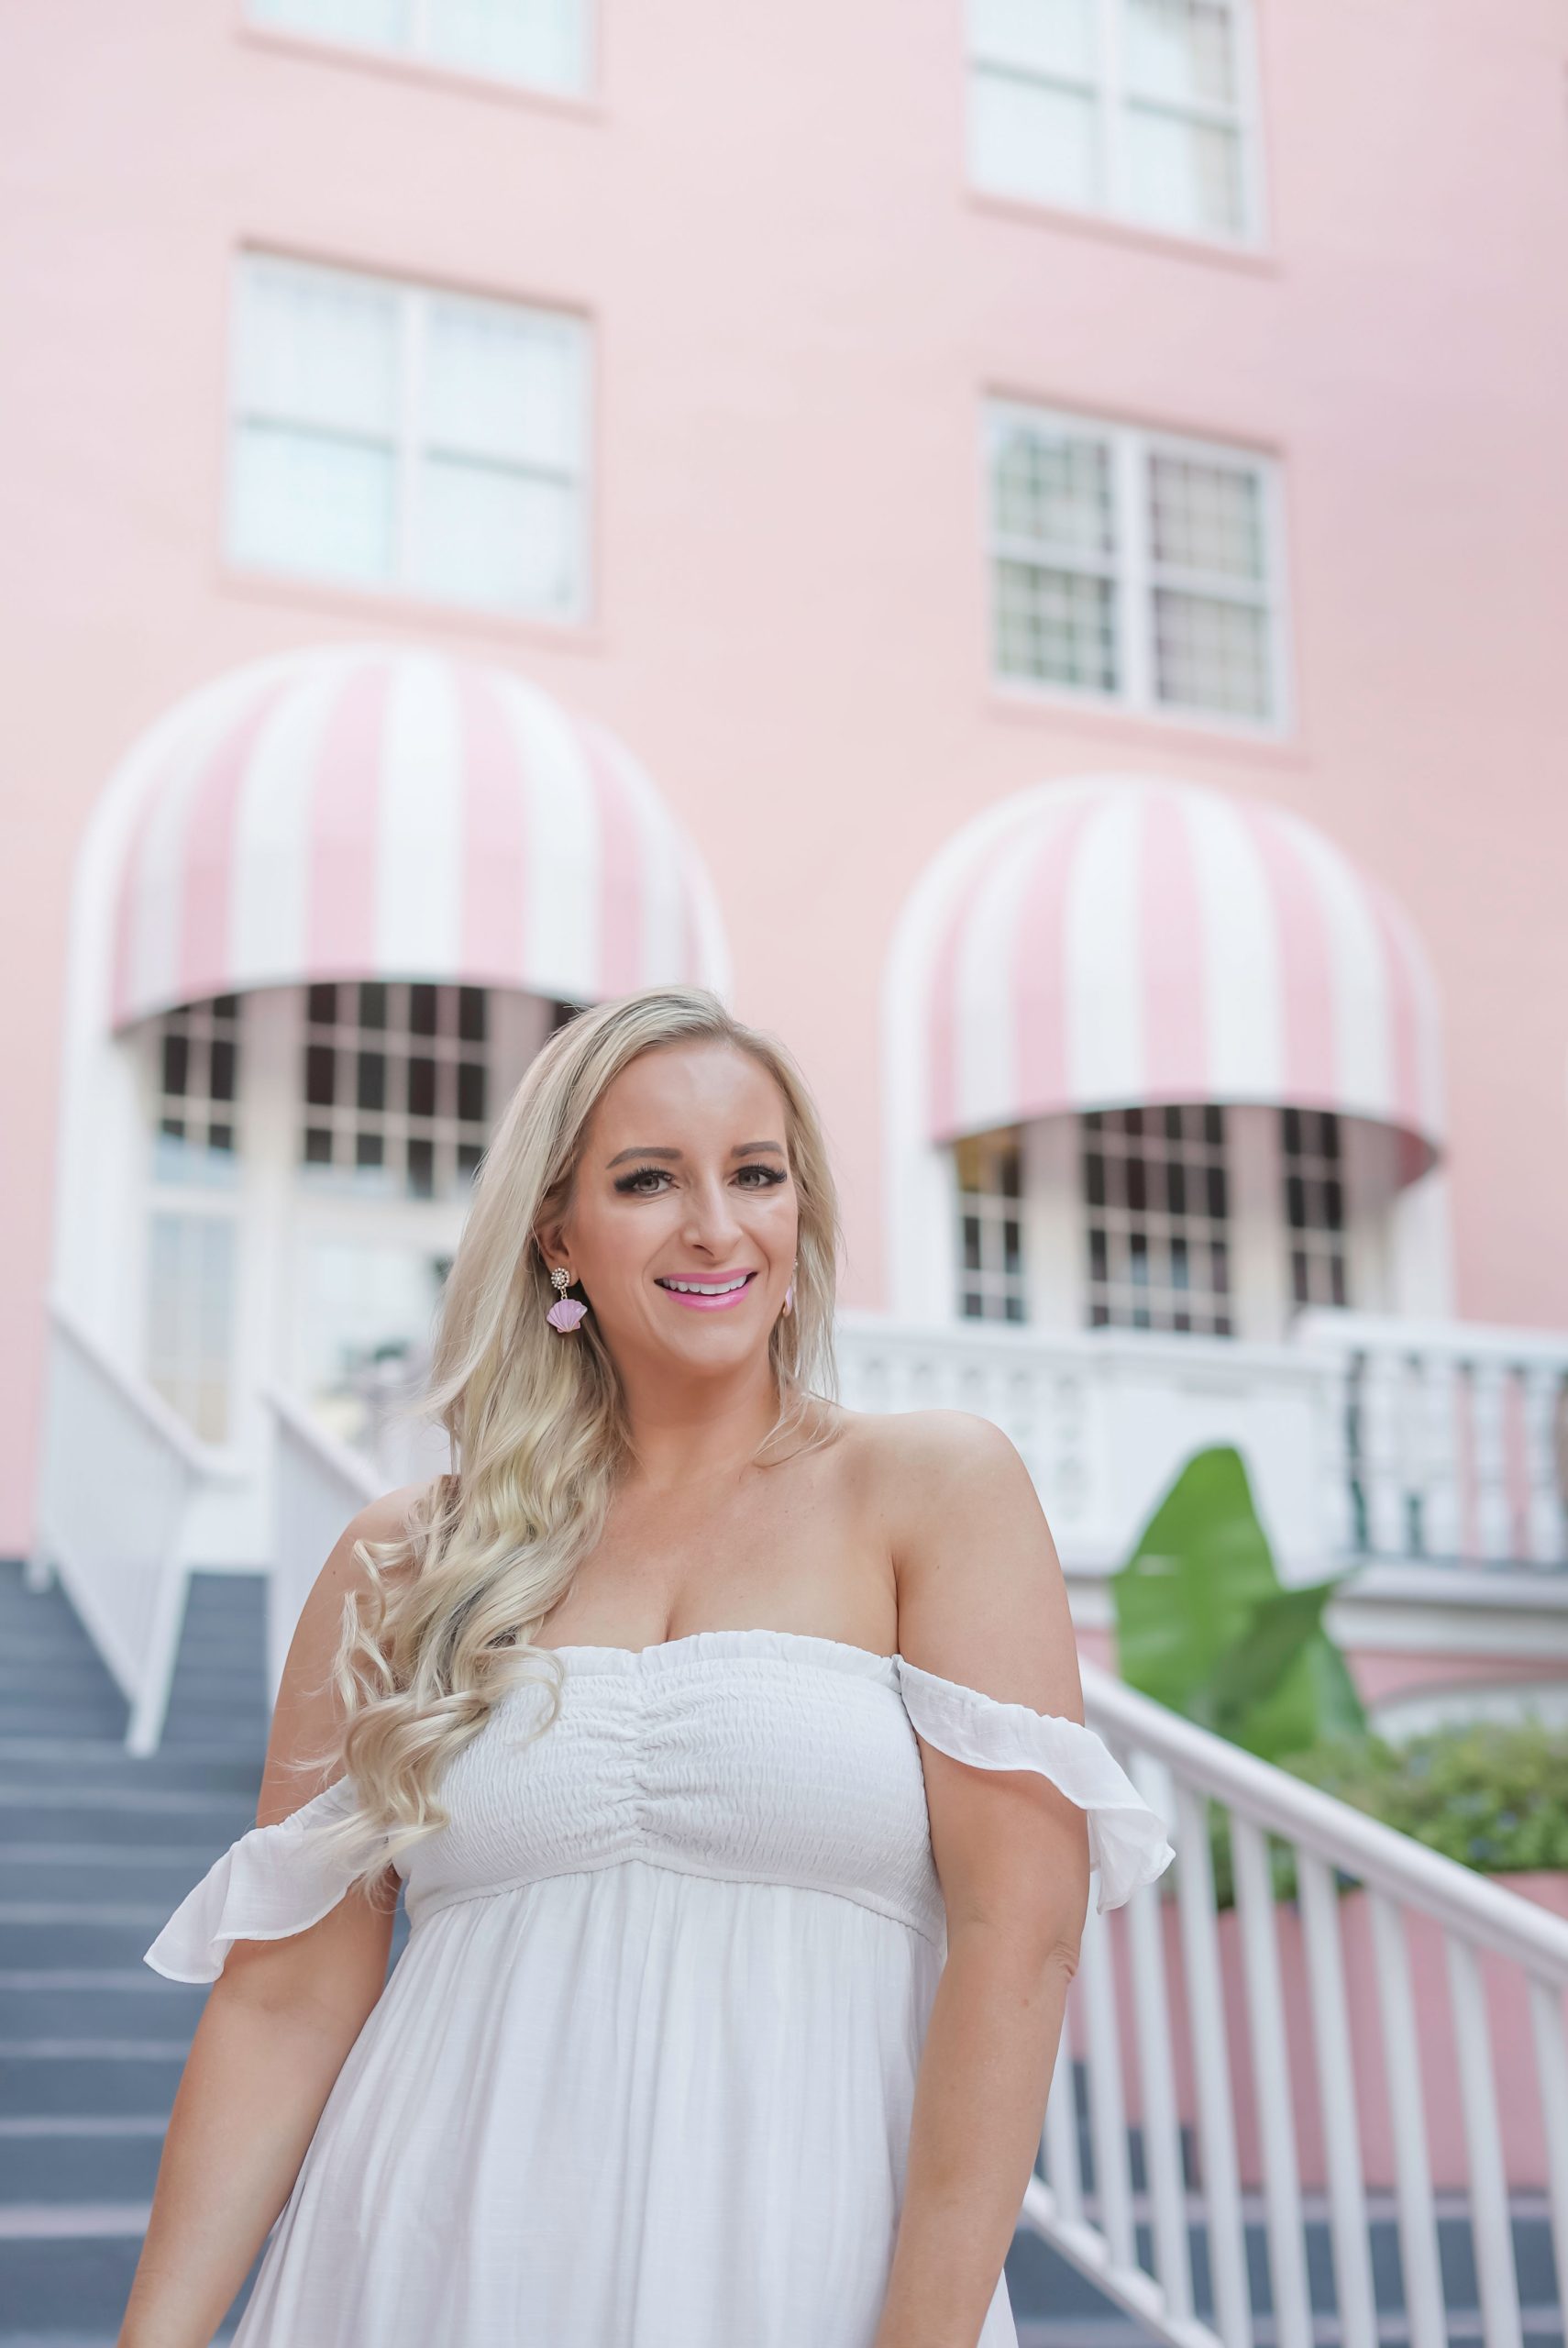 Florida Blogger, Jill DiGioia, The Lovely Flamingo wears pink shell earrings with pearl clusters from her new beach earring collection along with a white off the shoulder maxi dress standing in front of the Don Cesar on St. Pete Beach